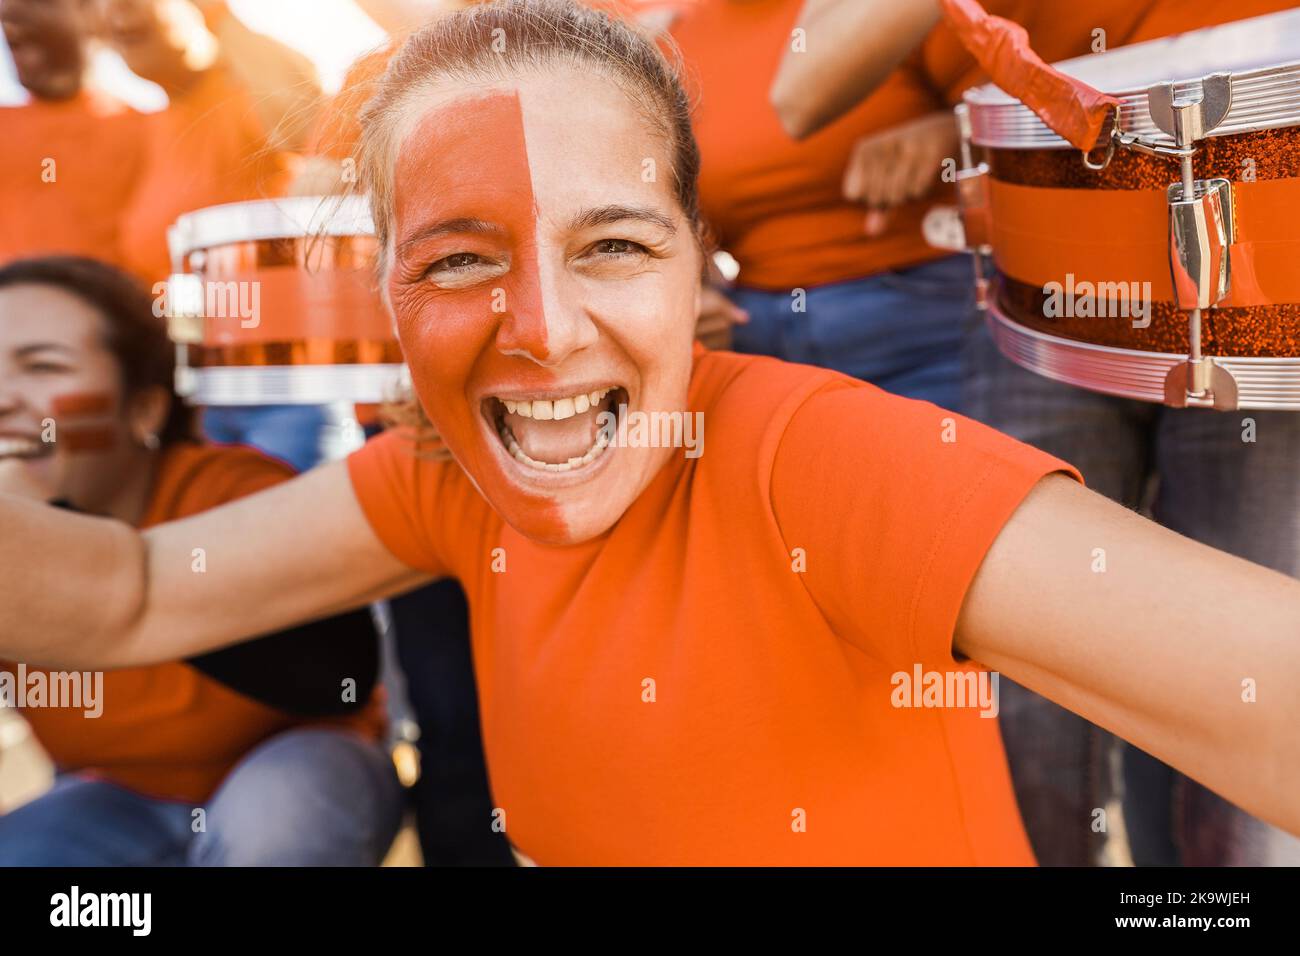 Orange sport fans screaming while supporting their team - Football supporters having fun at competition event - Focus on senior woman face Stock Photo